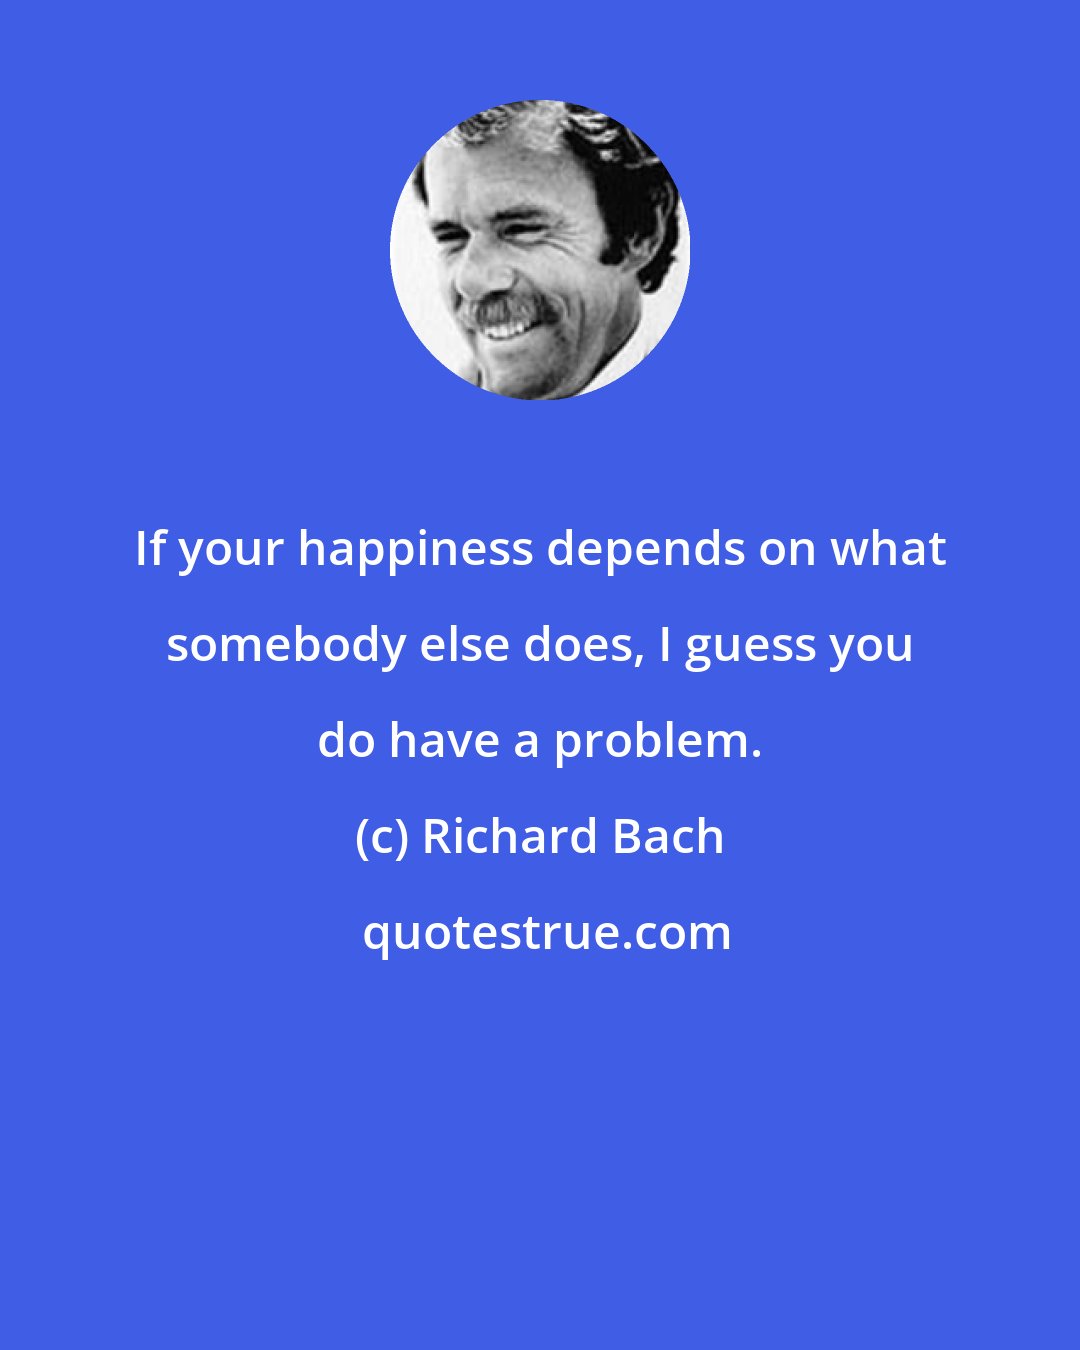 Richard Bach: If your happiness depends on what somebody else does, I guess you do have a problem.